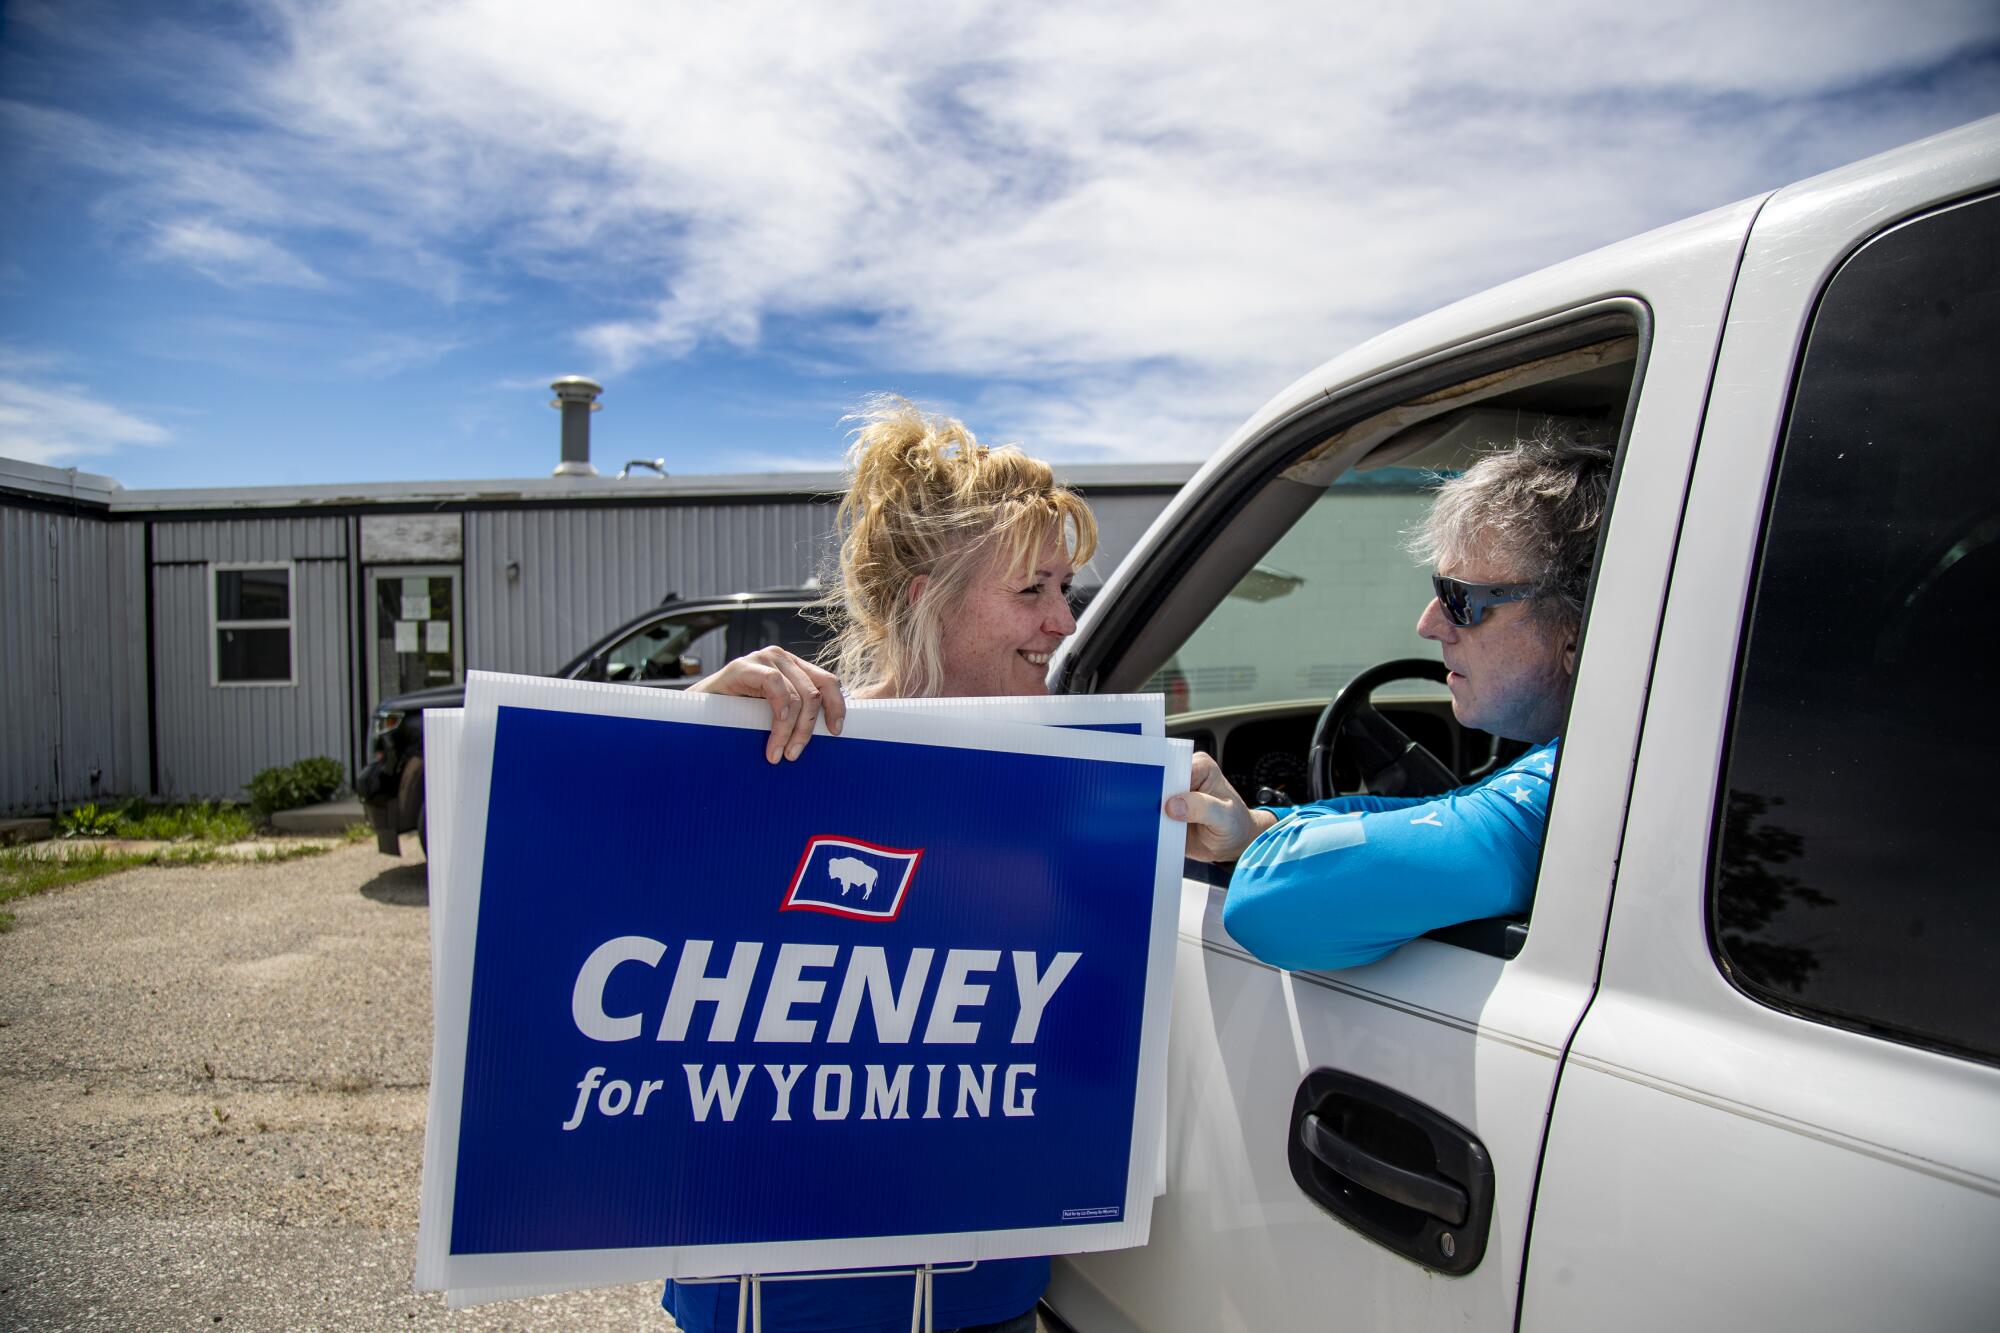 A woman hands blue Cheney signs to a man in a car